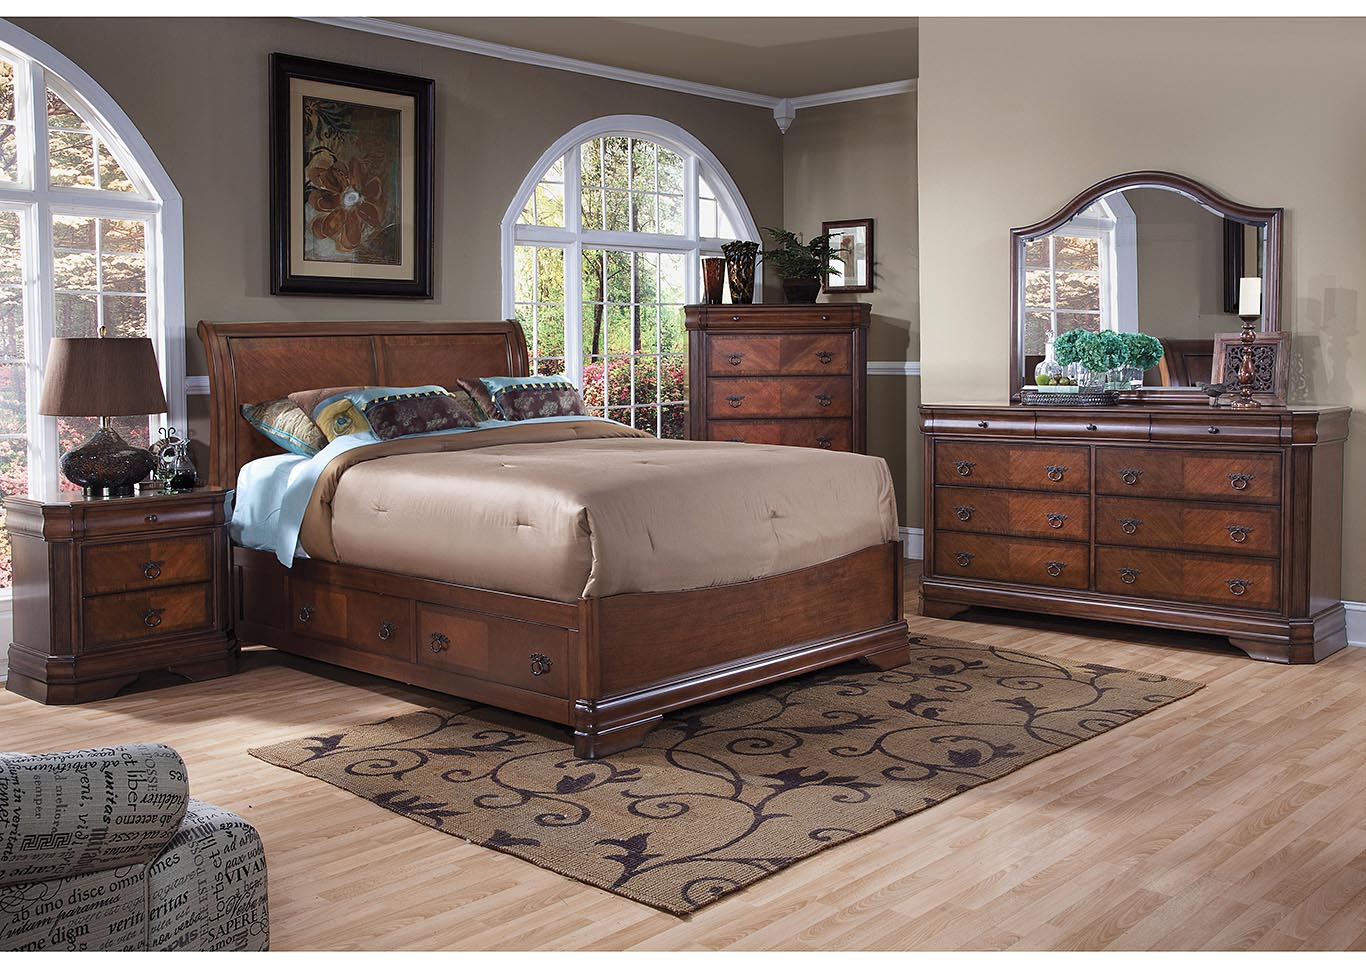 Sheridan Cherry Queen Bed w/Dresser and Mirror,New Classic